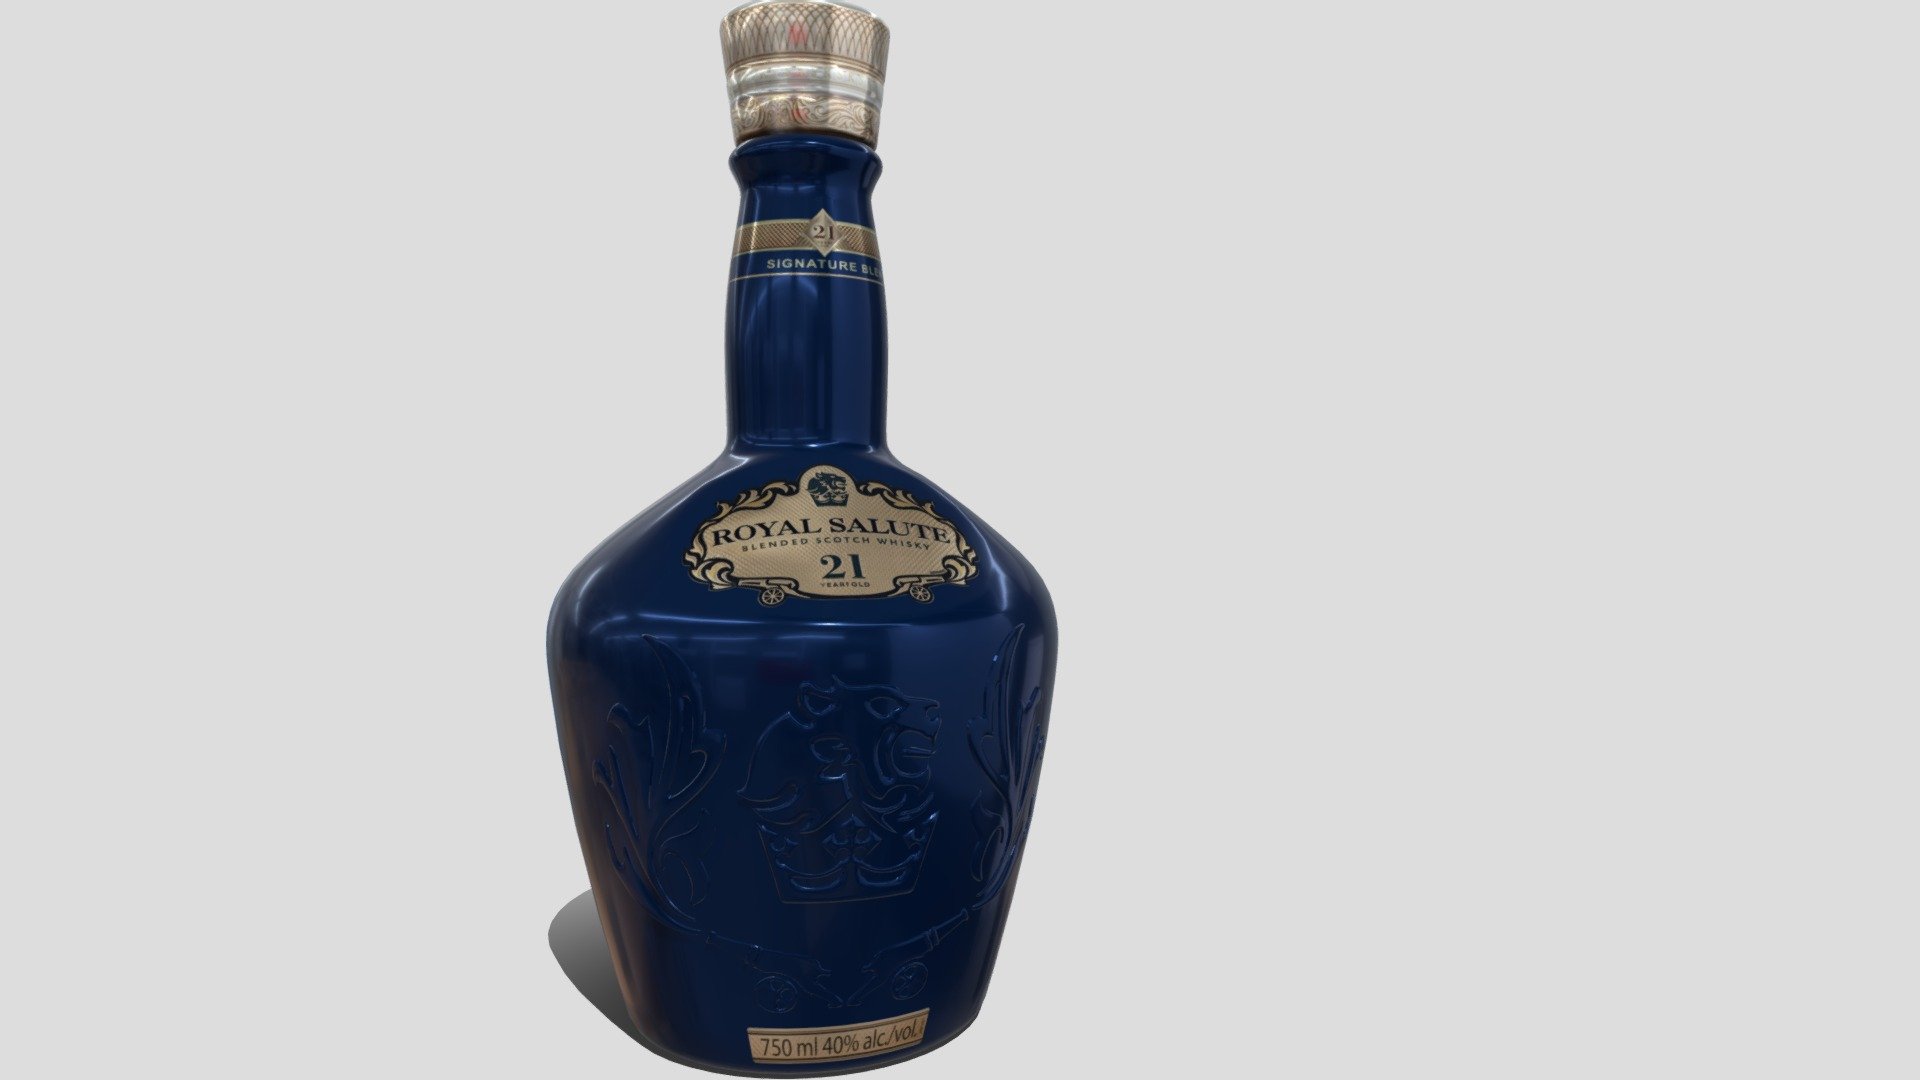 https://www.royalsalute.com - Royal Salute 21 whisky sapphire bottle - Buy Royalty Free 3D model by paperscan 3d model